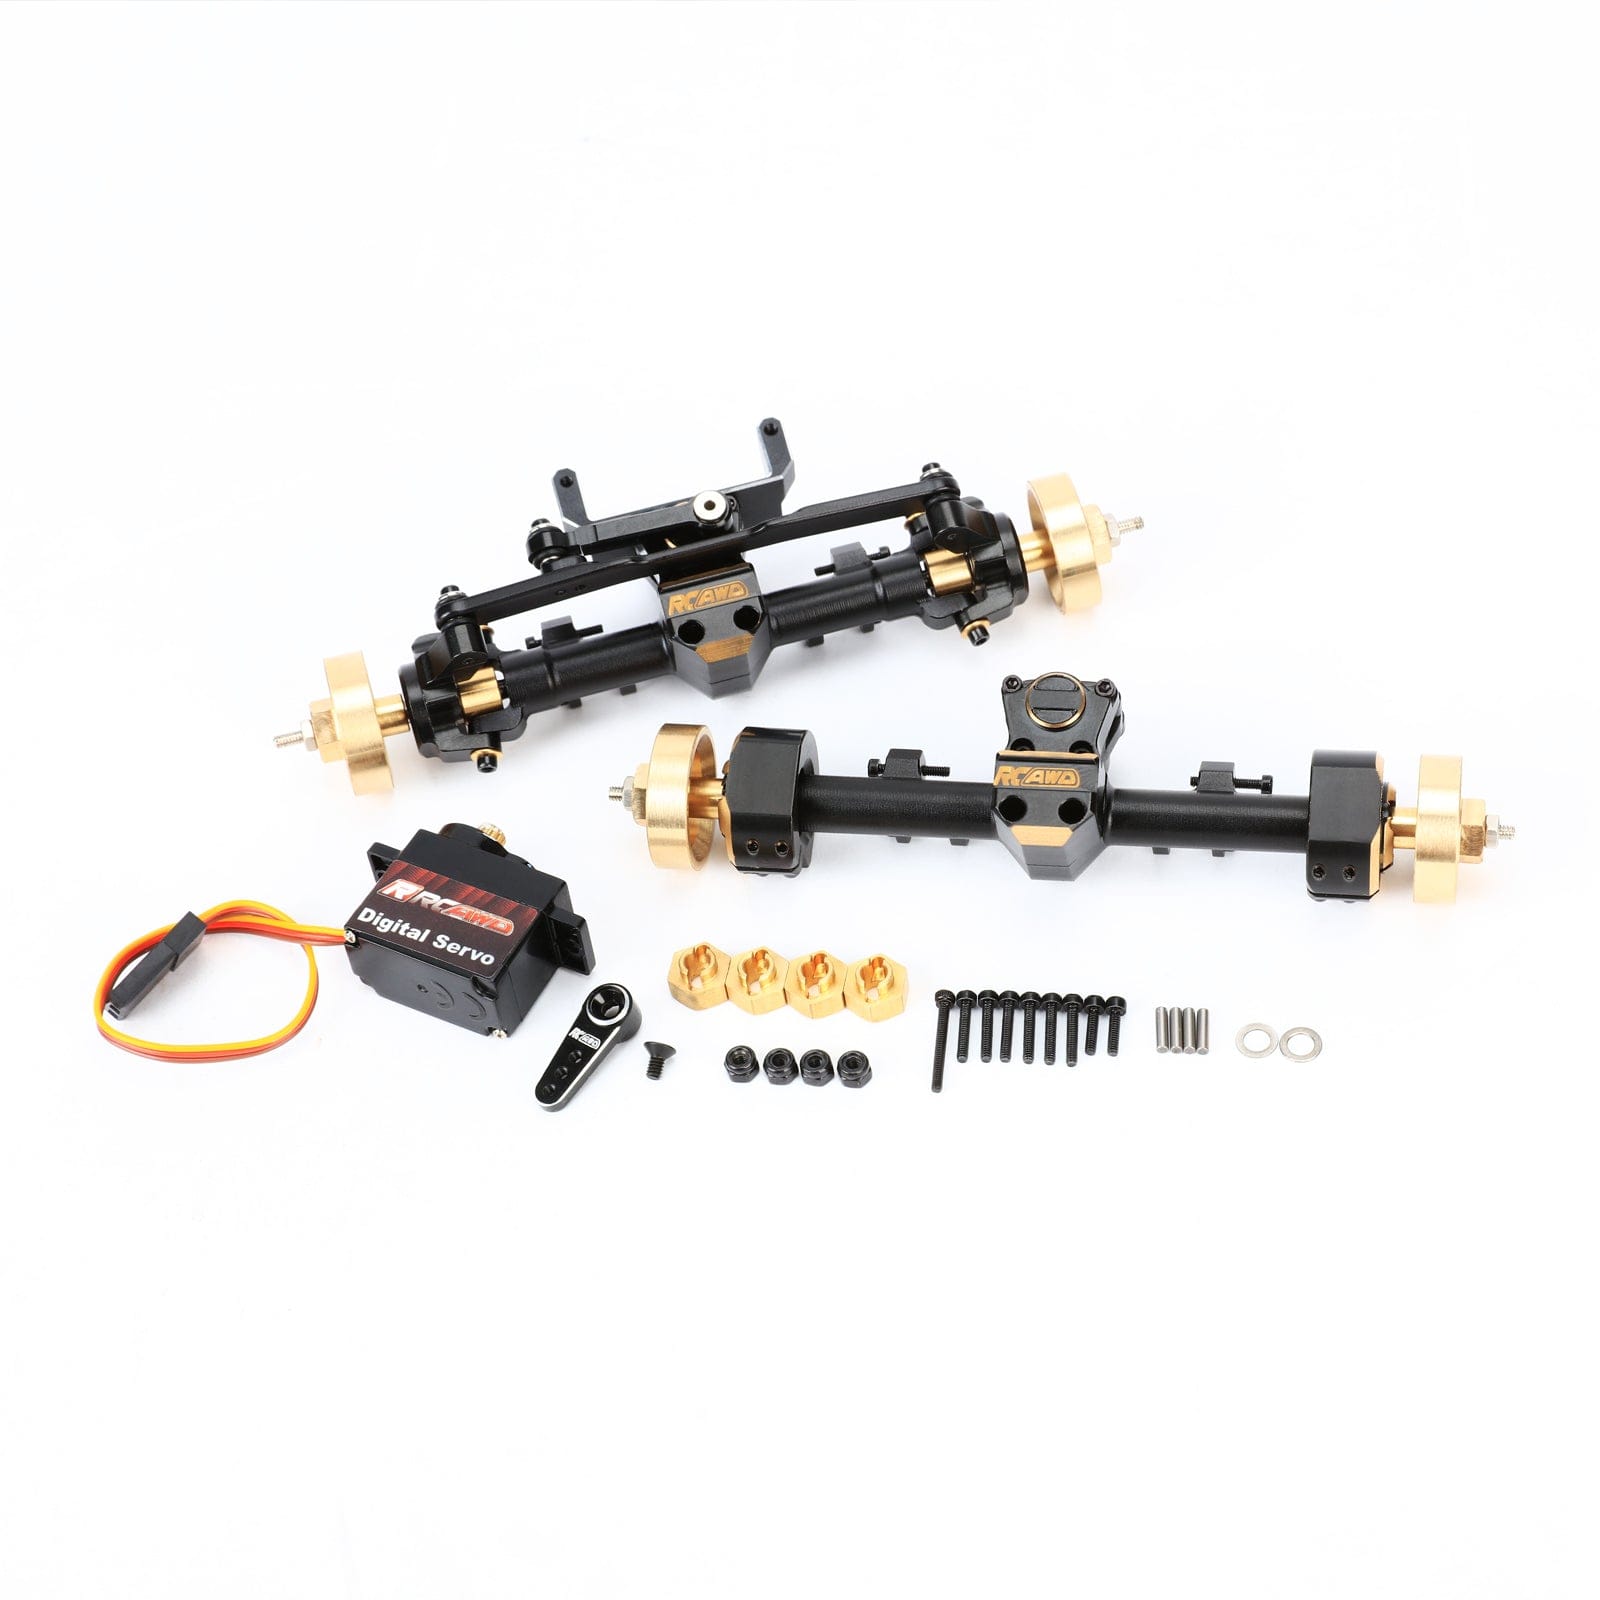 RCAWD AXIAL SCX24 RCAWD Axial SCX24 Upgrades Axles Set + 12mm Extended Counterweight Hex Axles Upgrades Set with 5g Metal Servo